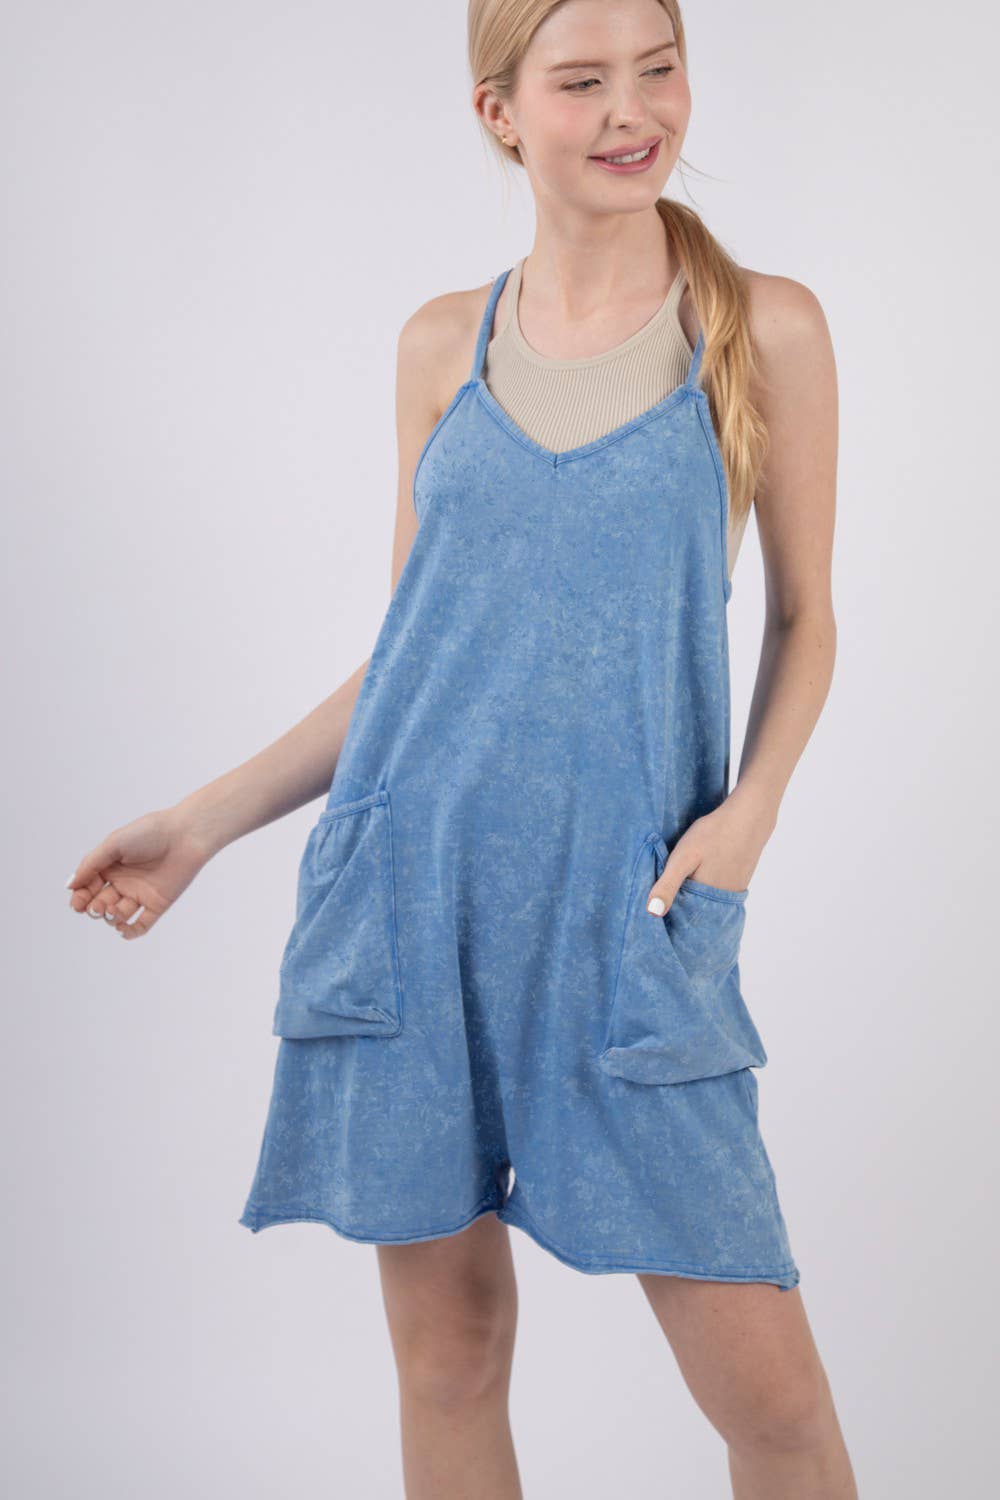 NP70359-Casual Sleeveless Washed Knit Romper